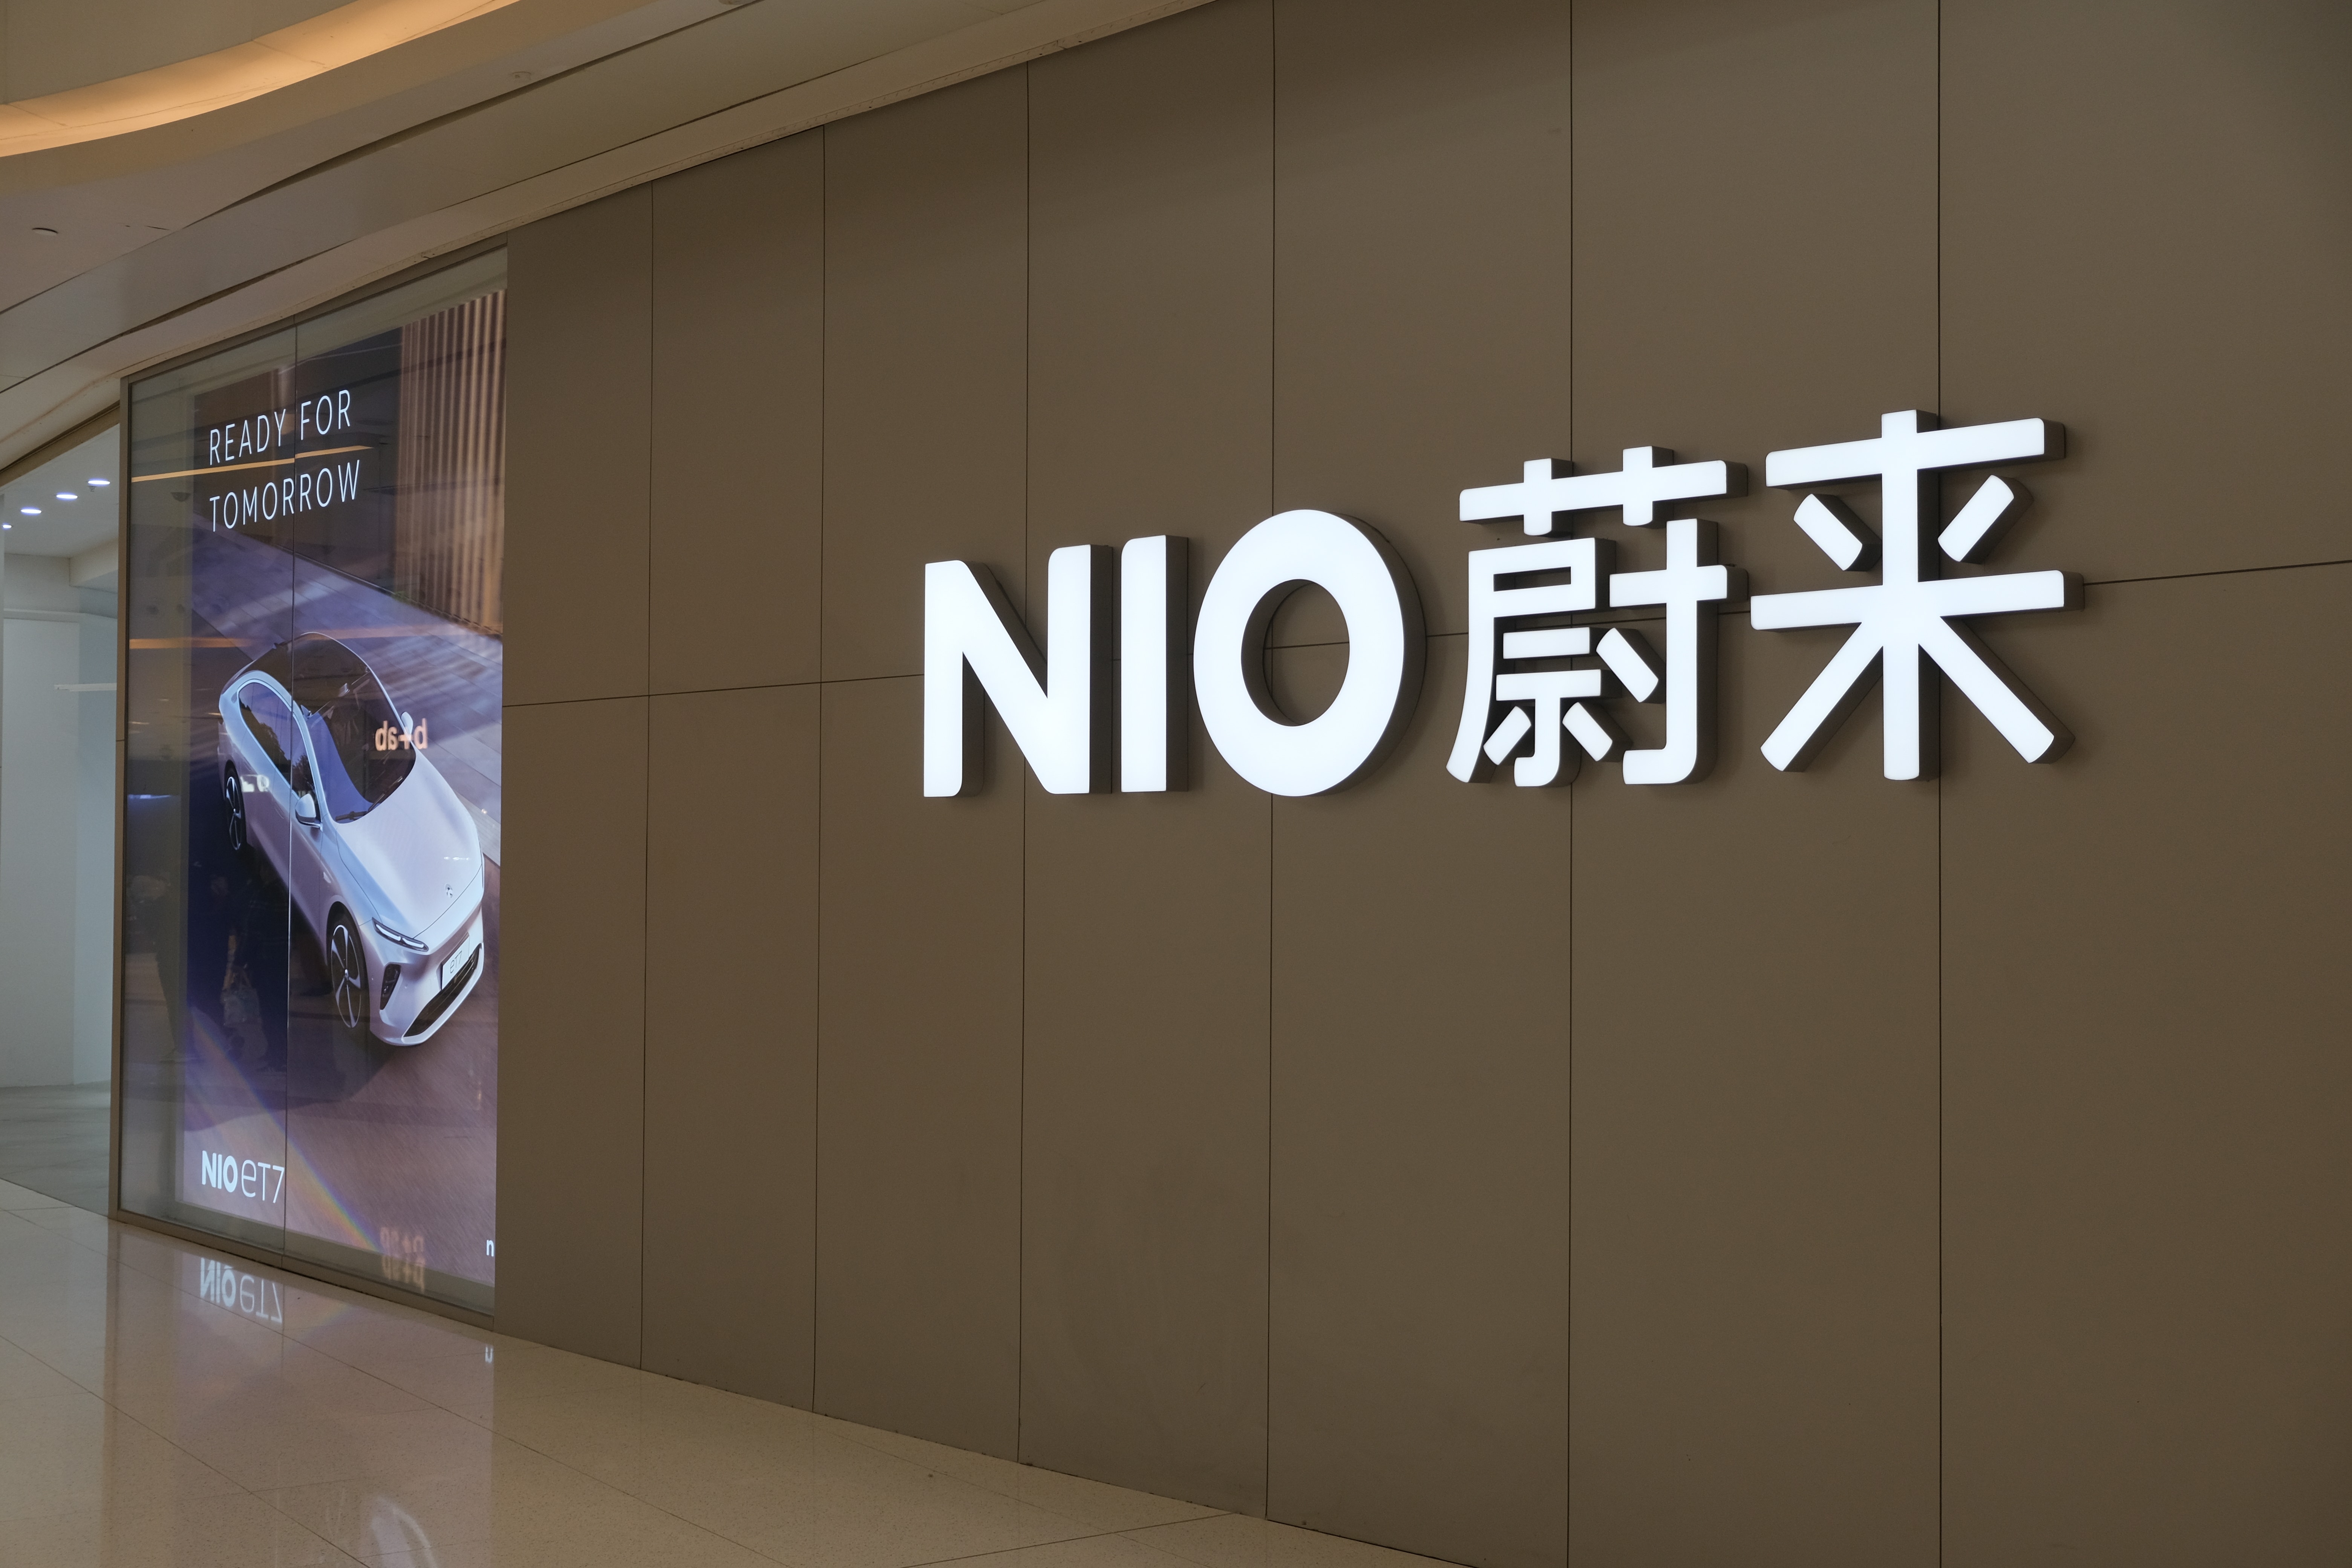 Nio Vs. XPeng Vs. Li Auto: How May Deliveries Stack Up